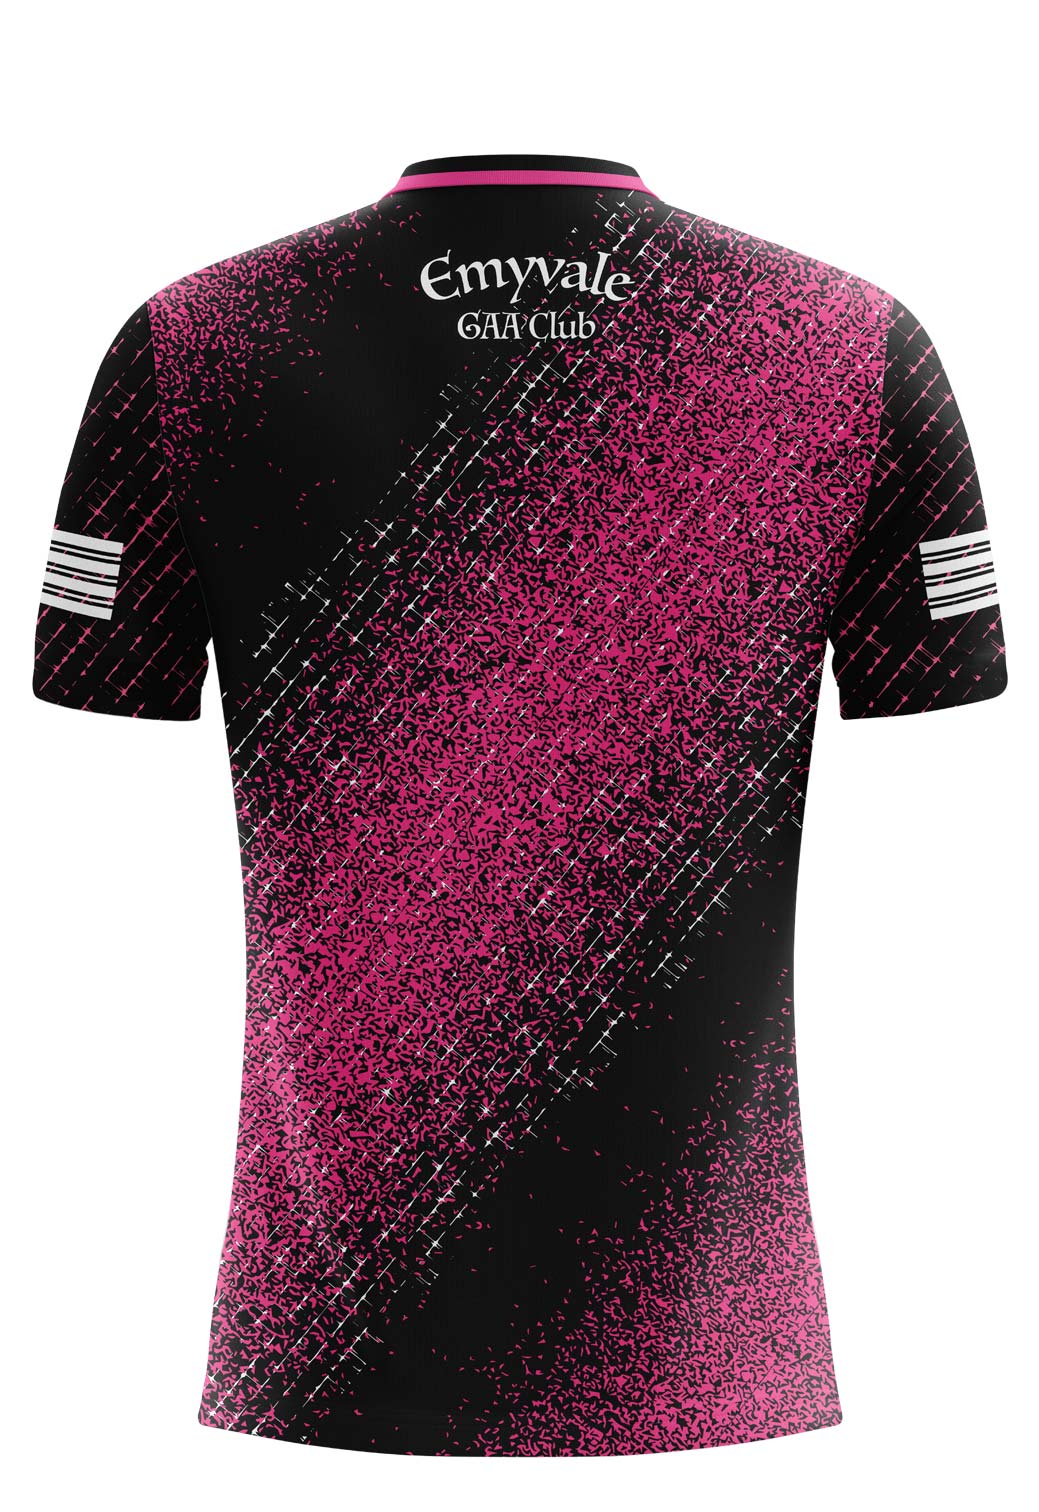 Emyvale GAA Pink Comet Style Training Jersey Player Fit Adult